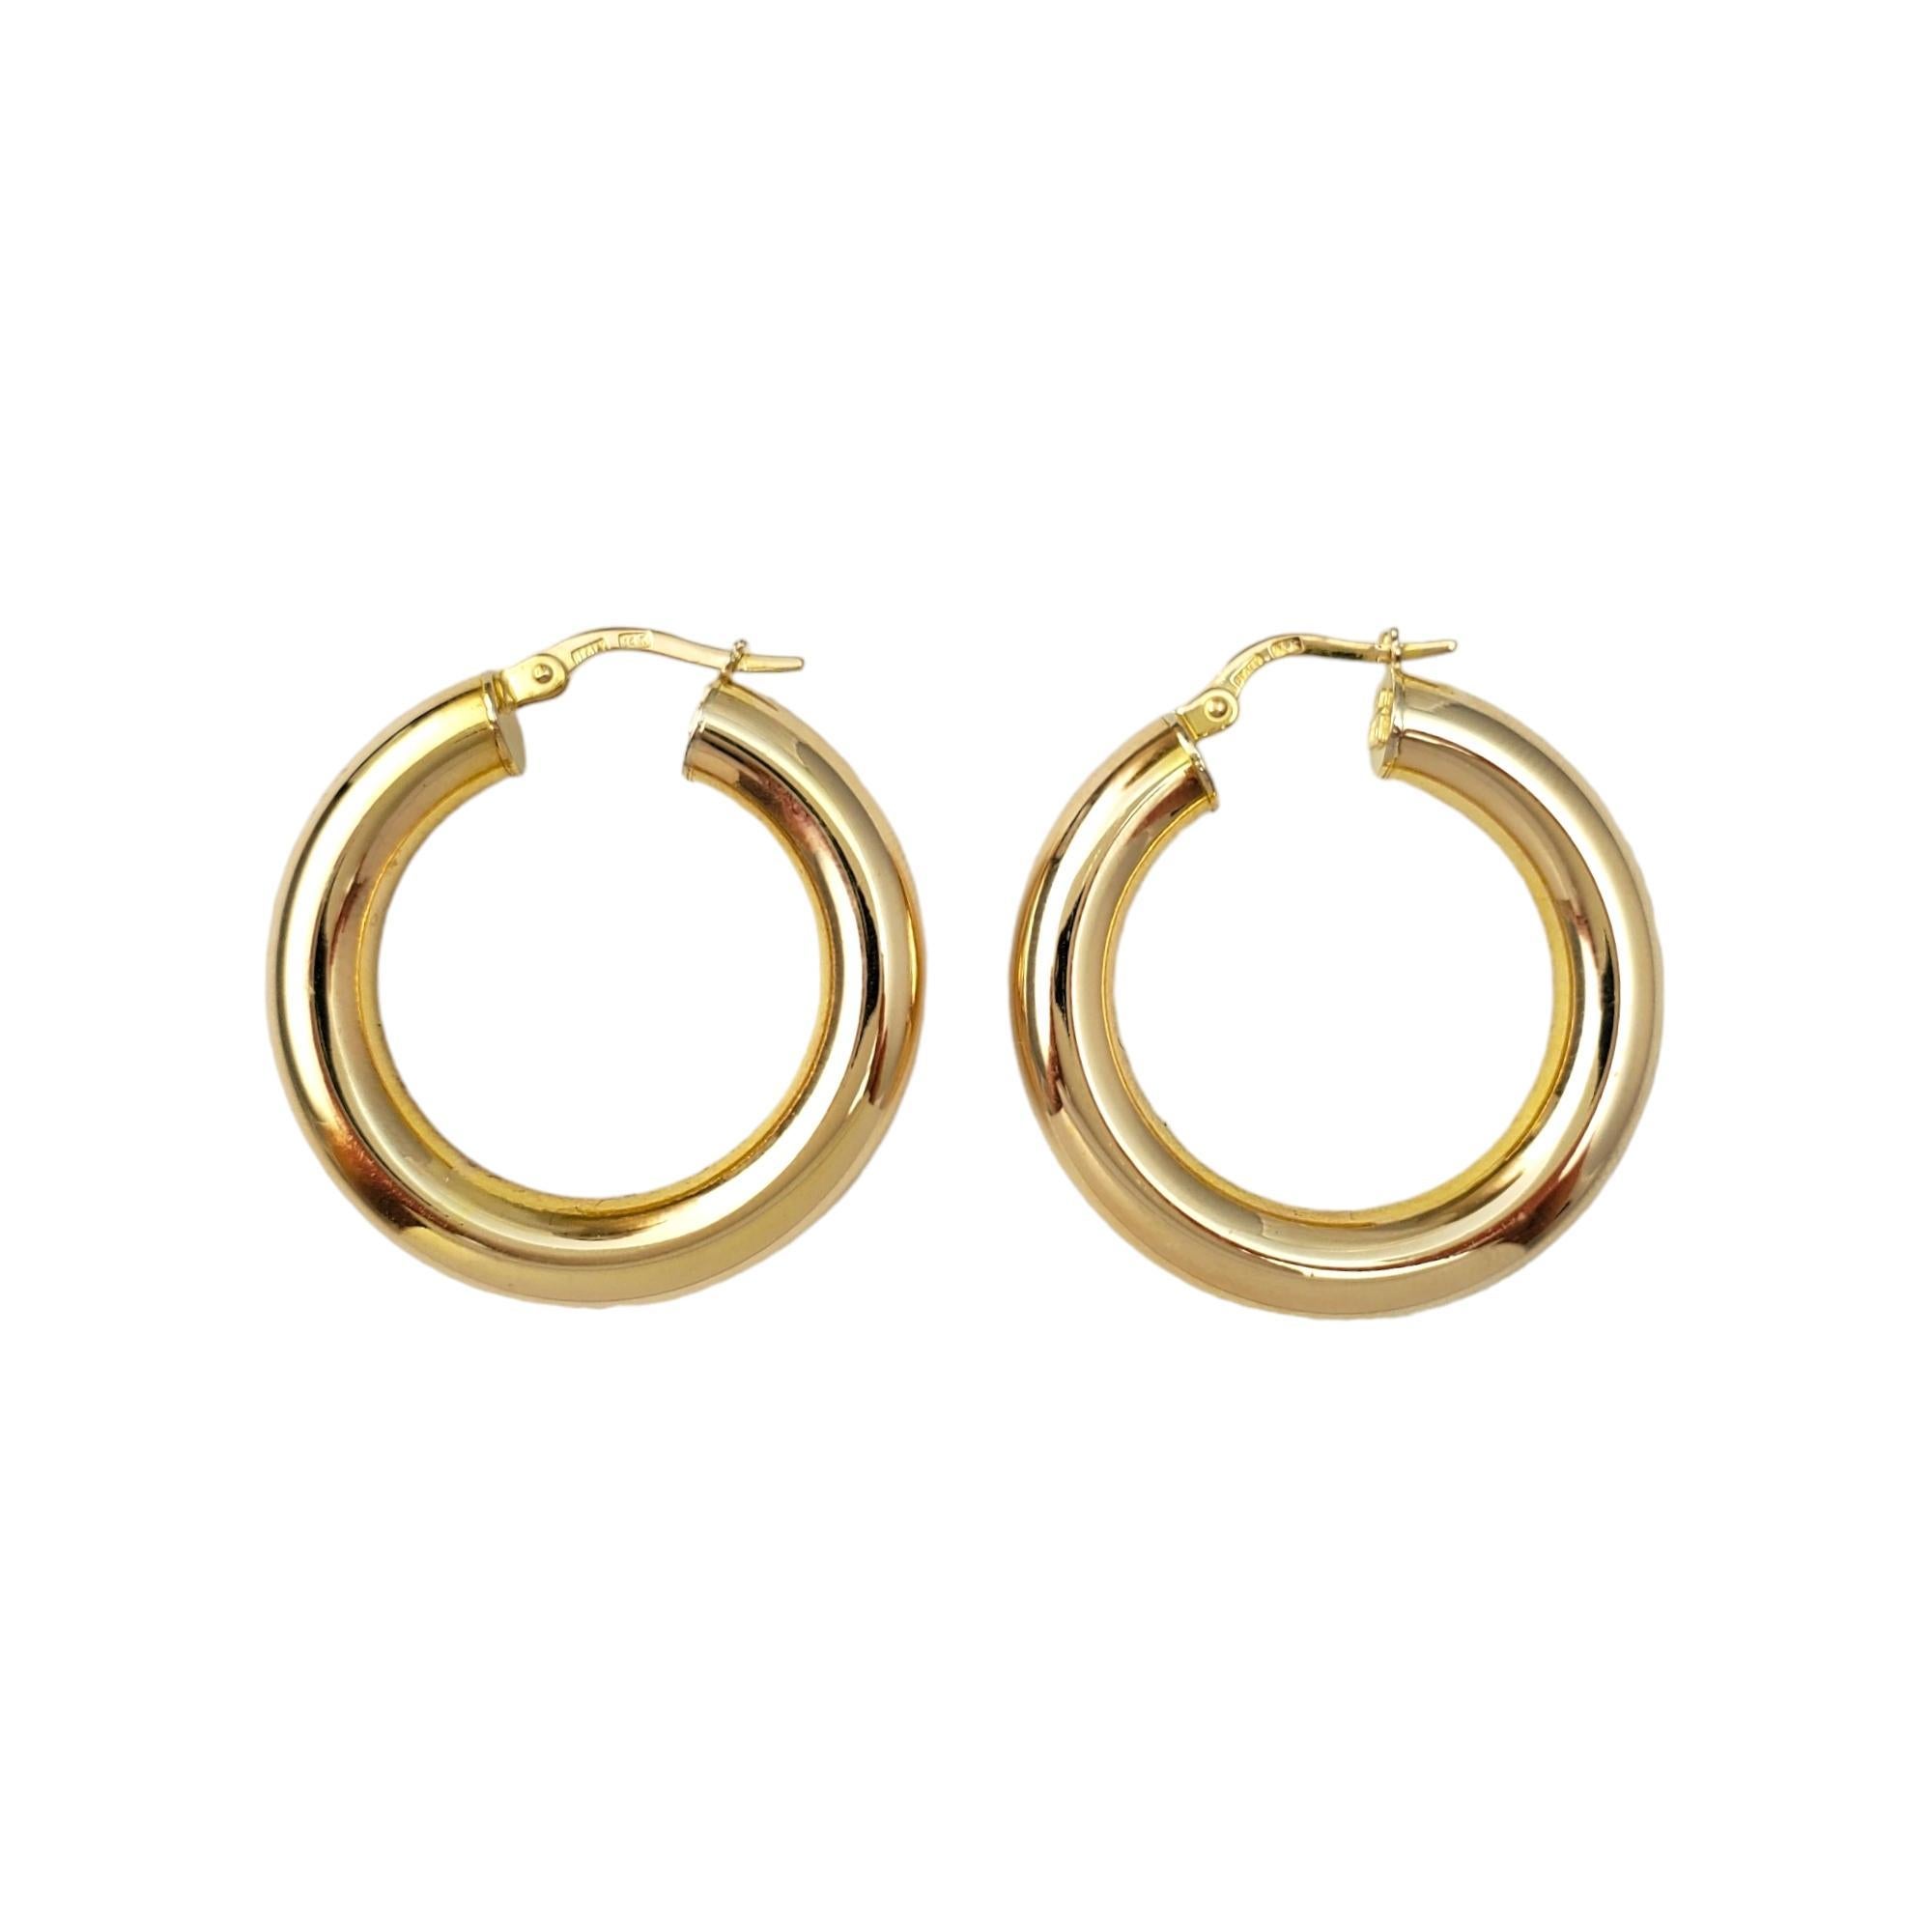 14K Yellow Gold  Hoop Earrings -

These stunning earrings are a classy accessory.

Size:  29.64 mm X 29.78 mm X 5.19 mm

Weight:  3.5 dwt. /  5.4 gr.

Marked: ITALY 14K 80  

Very good condition, professionally polished.

Will come packaged in a